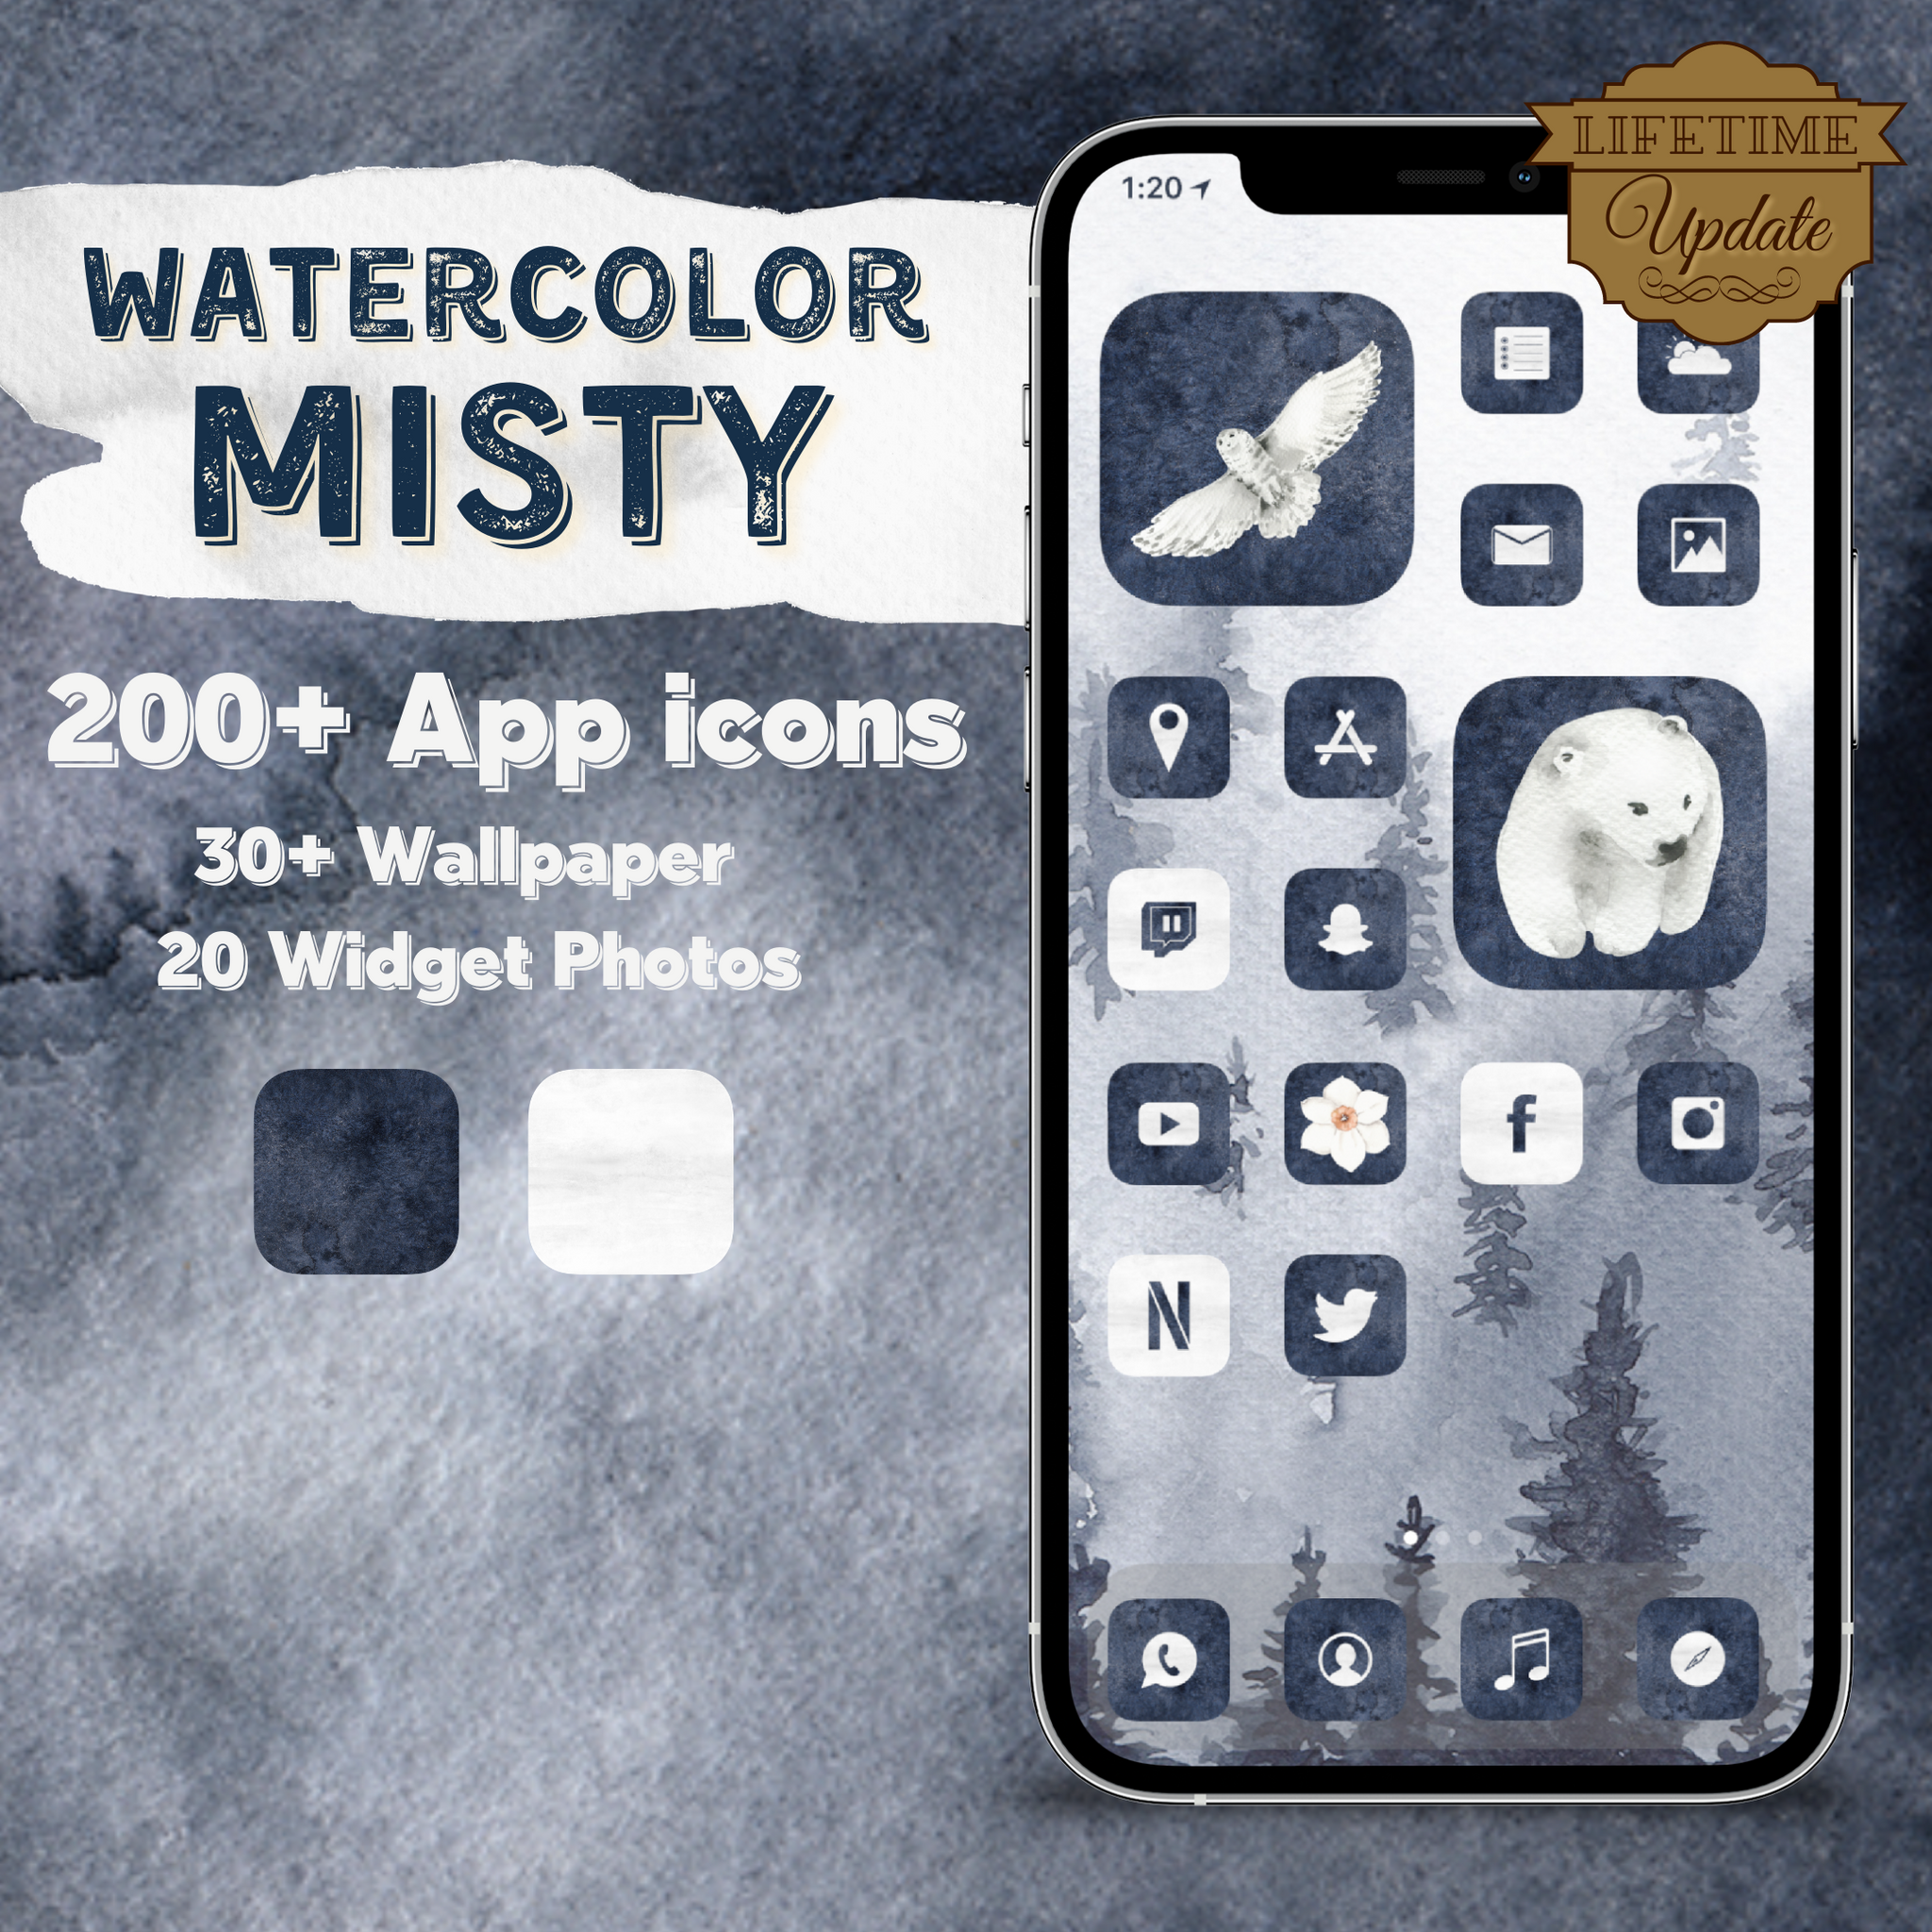 0 Watercolor Misty Icon Pack Ios 14 App Icons Social Media Icons Game Cb